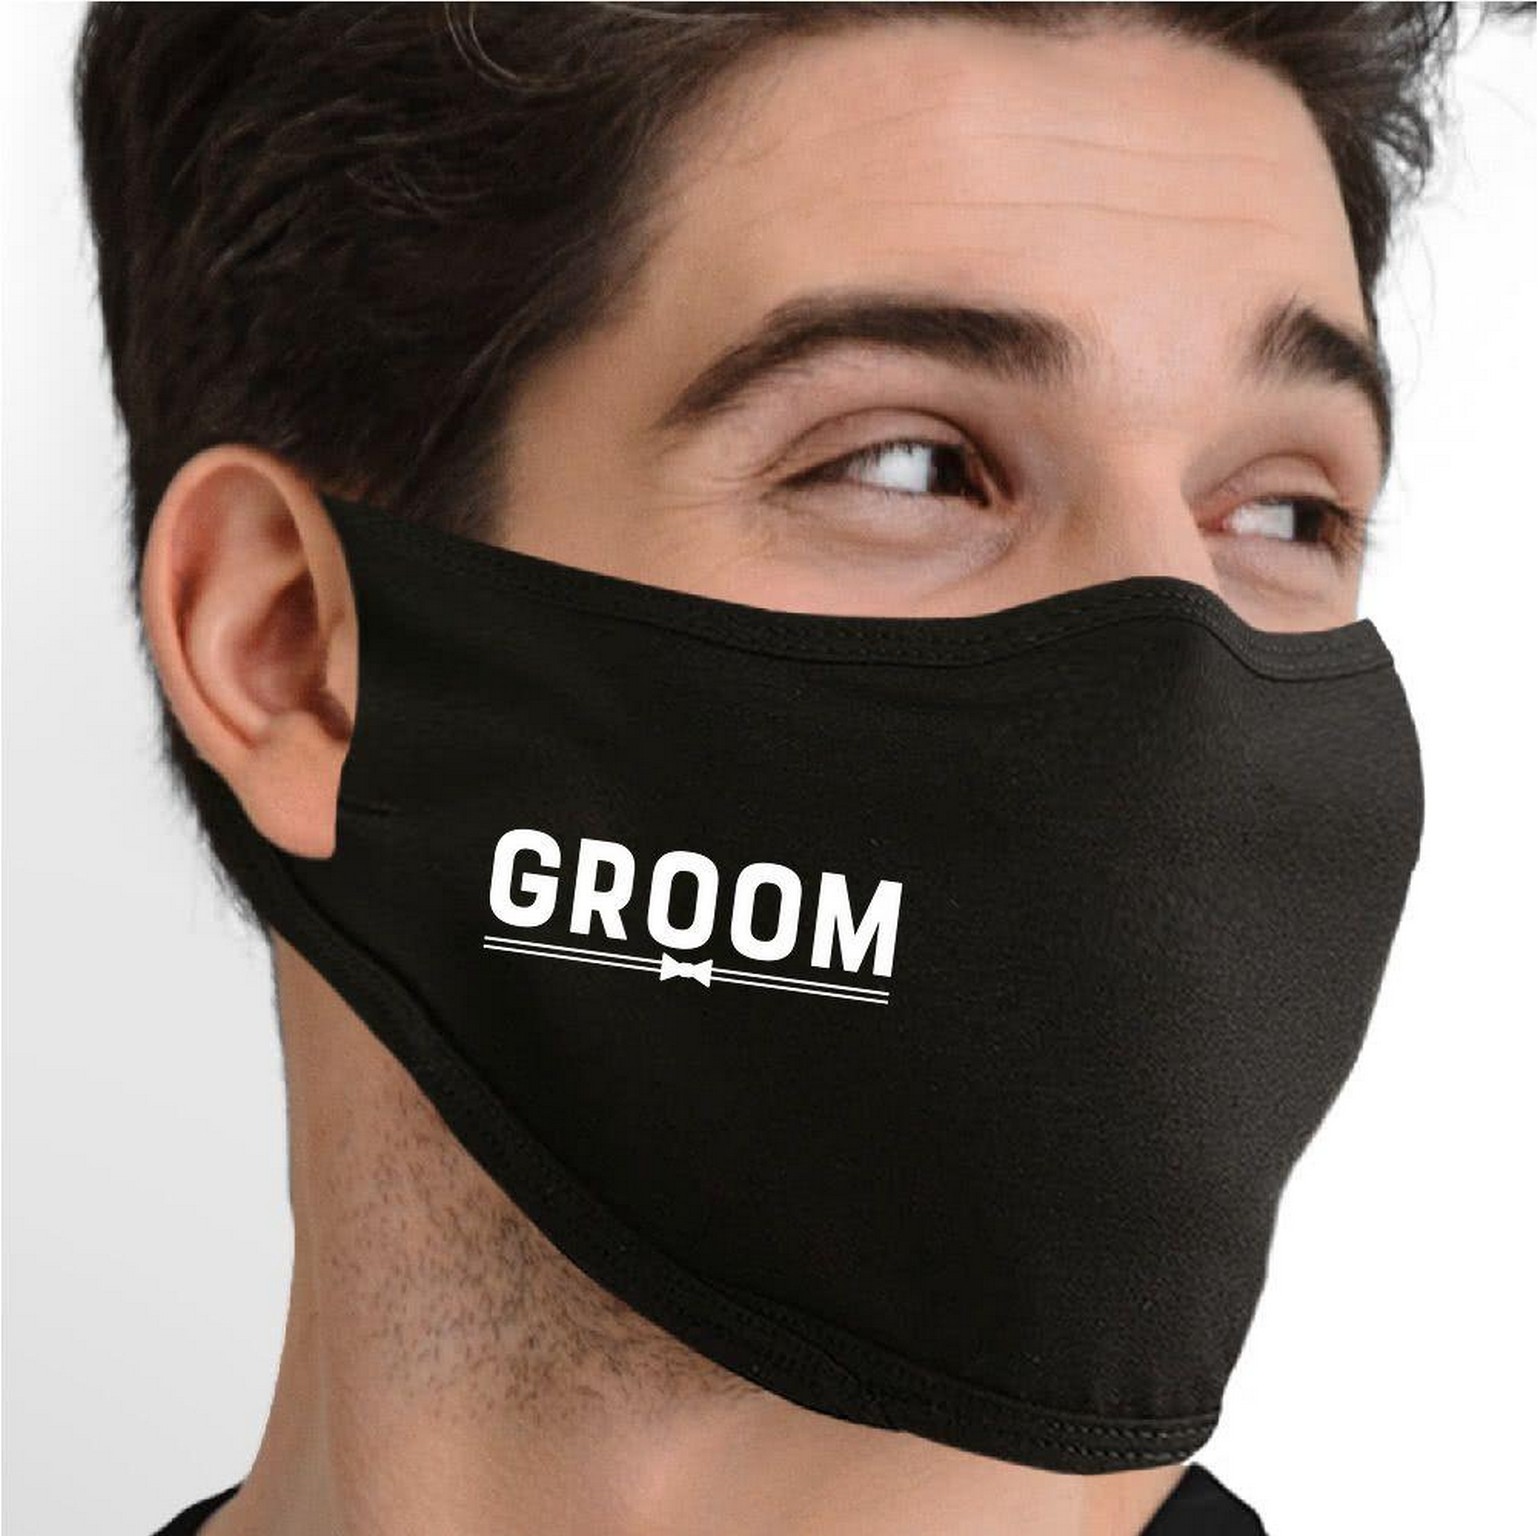 Cotton mask for a groom